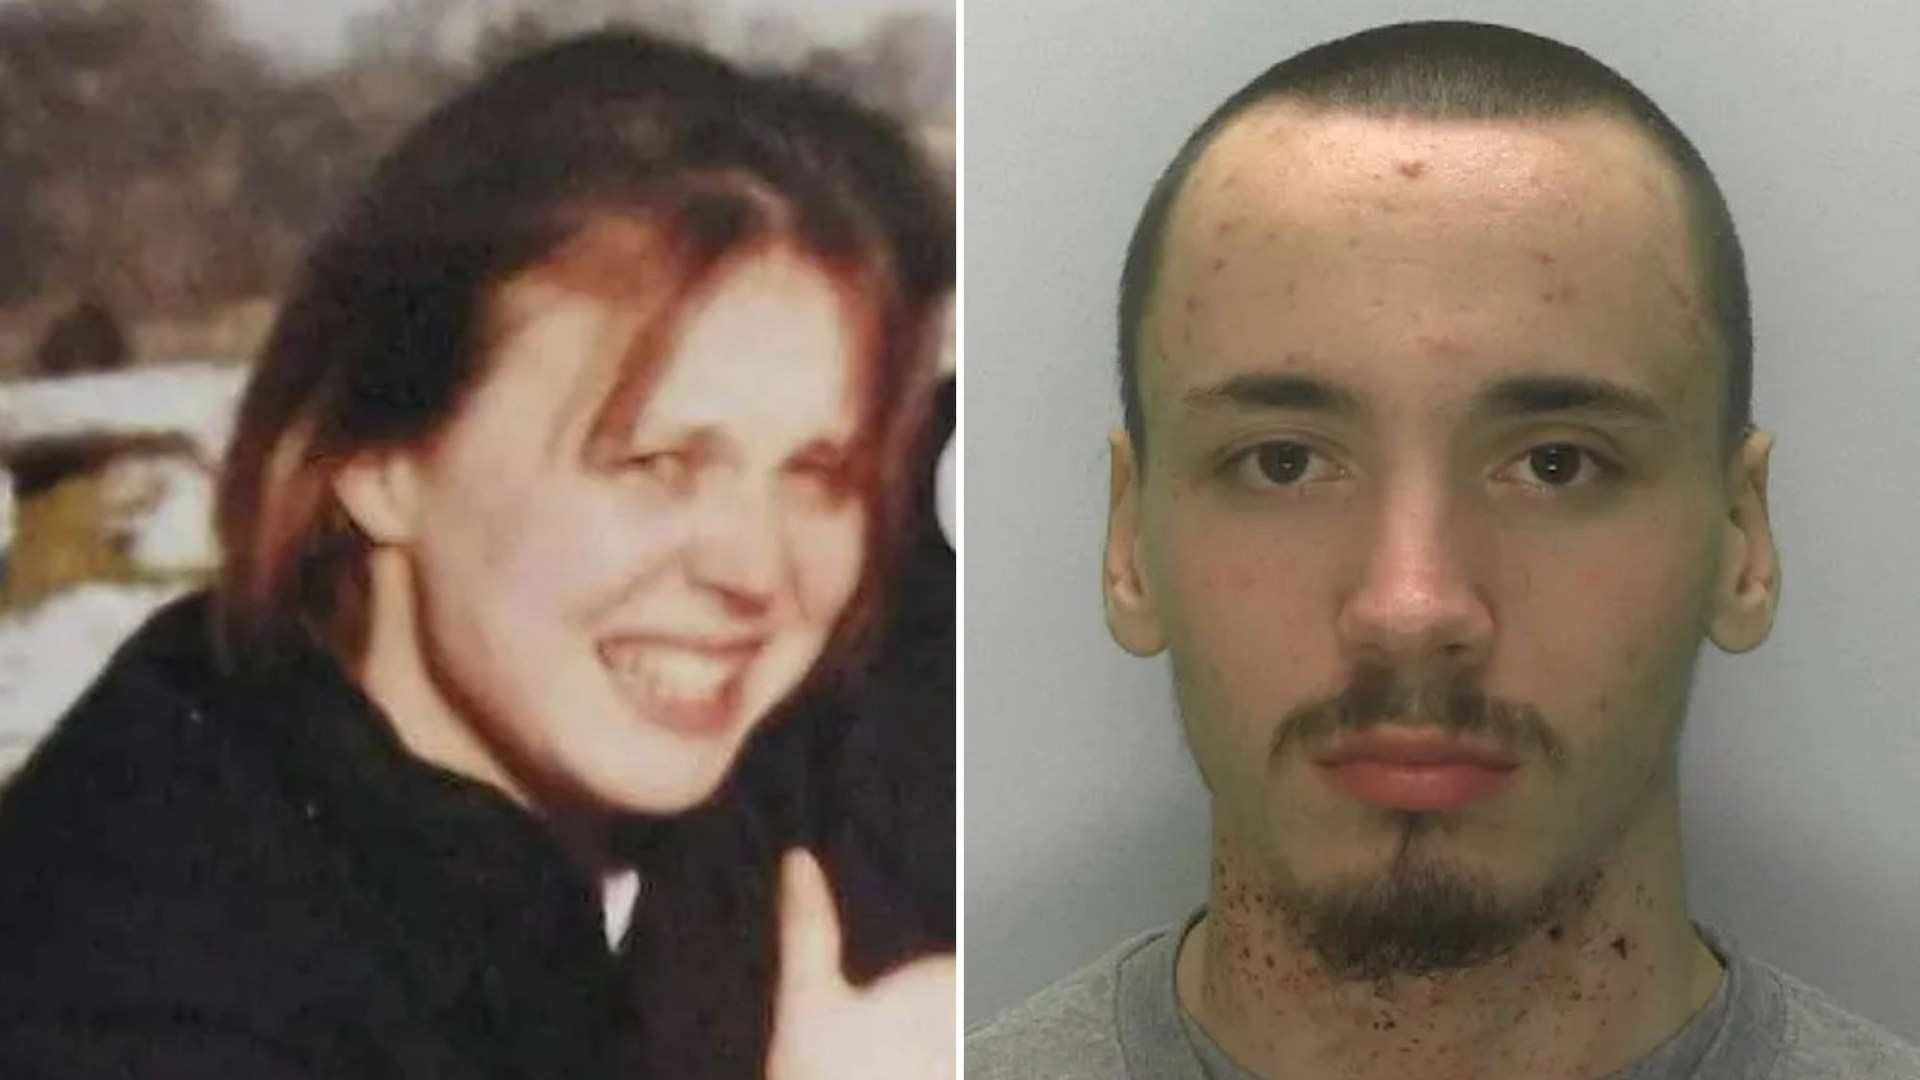 Son, 21, admits killing his mum, 47, after voices in his head told him to stab her 100 times